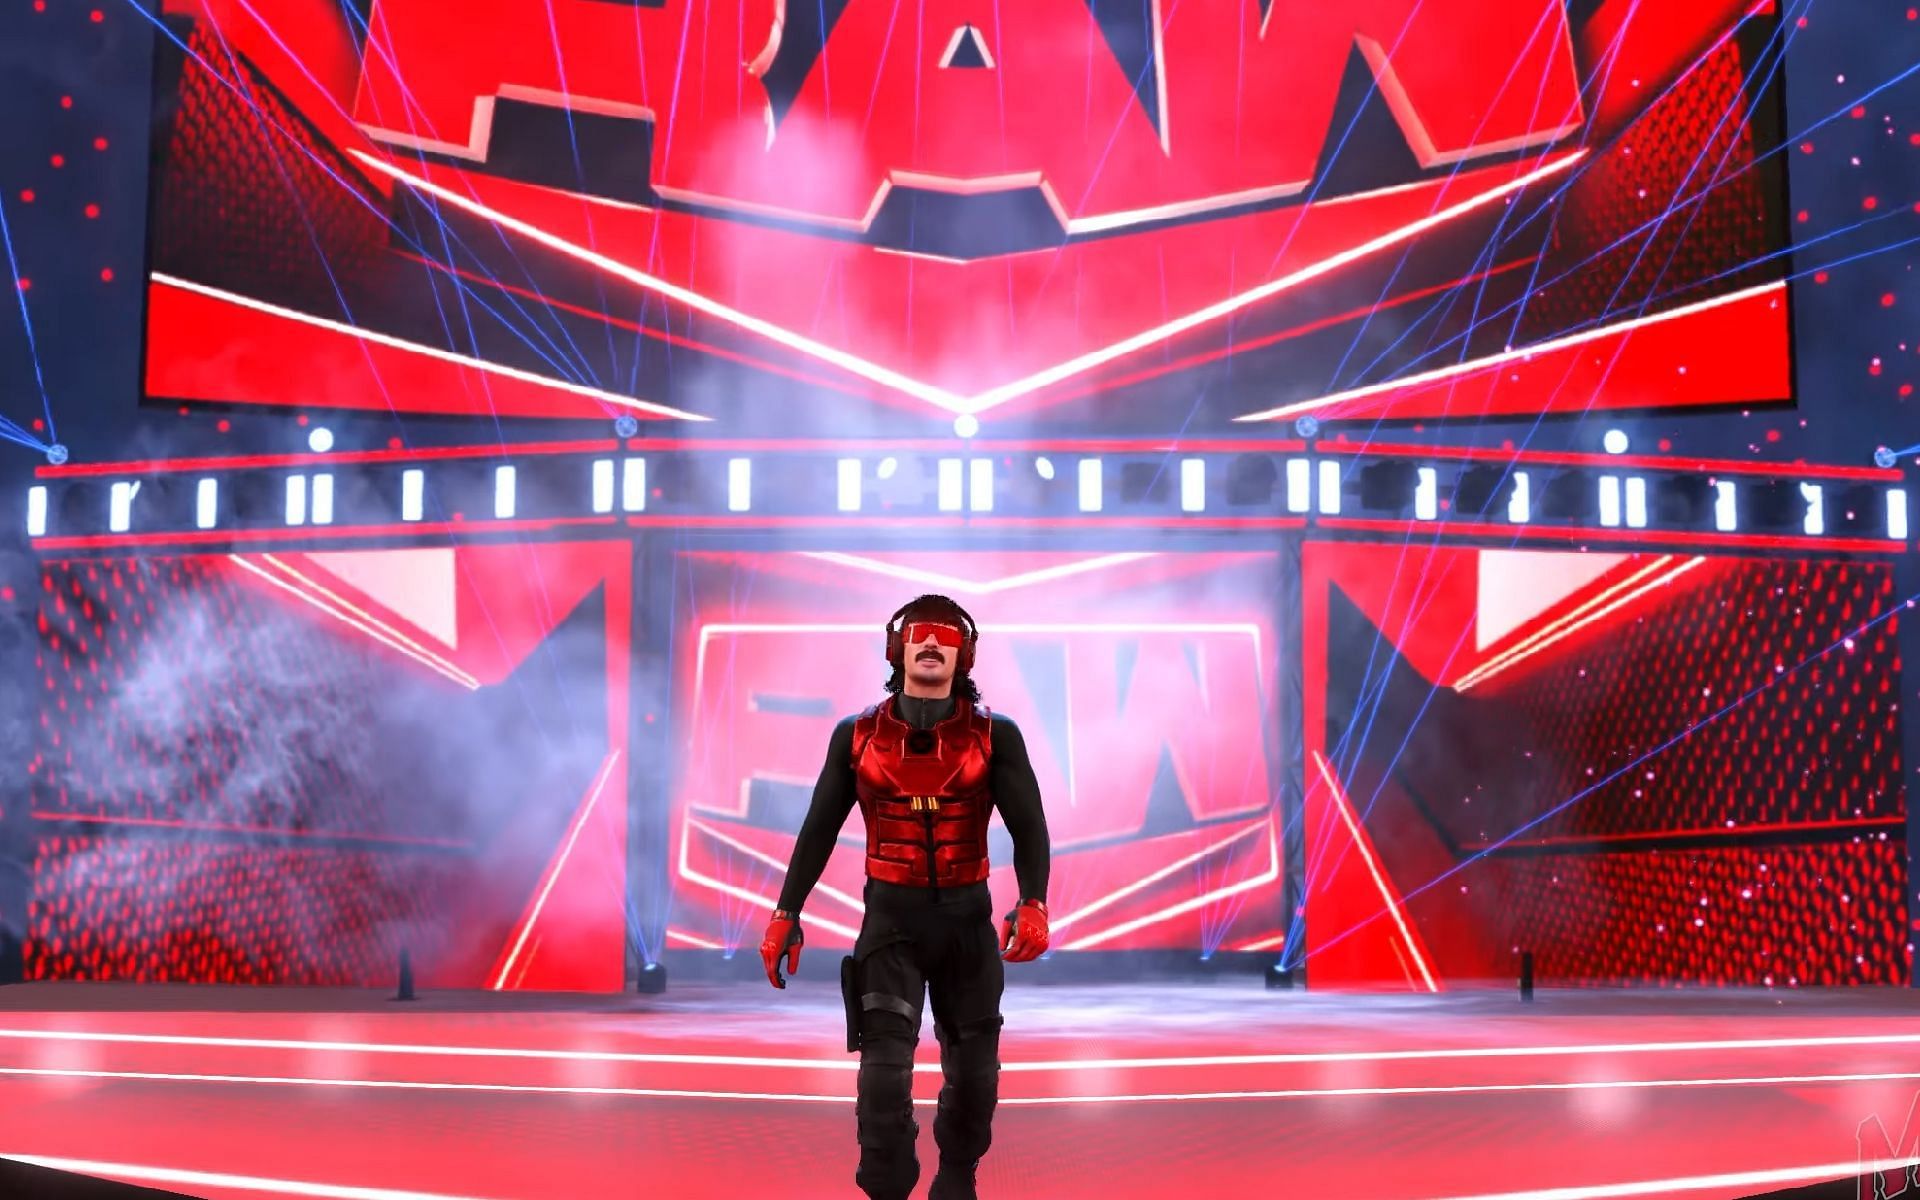 DrDisrespect as a WWE wrestler made by a fan (Image via MG21 TV/YouTube)